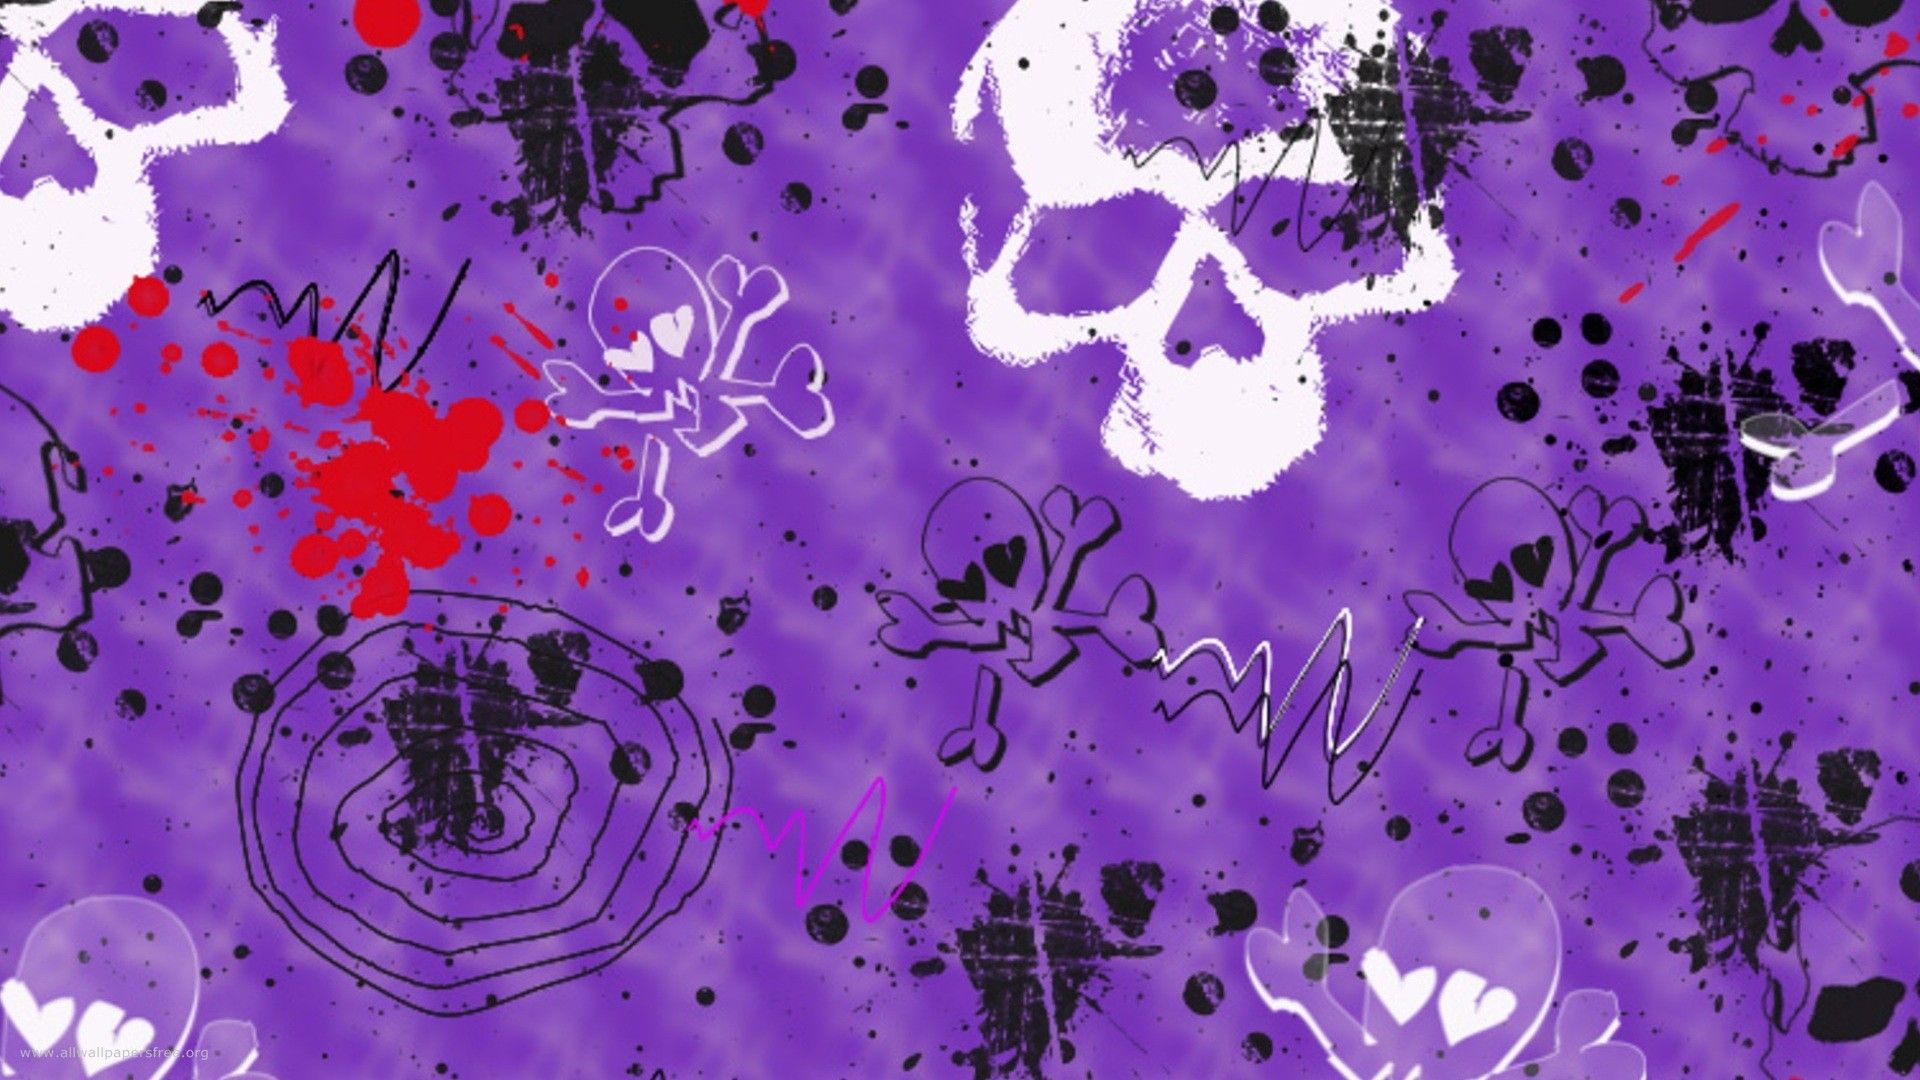 A purple background with skulls and hearts. - Halloween desktop